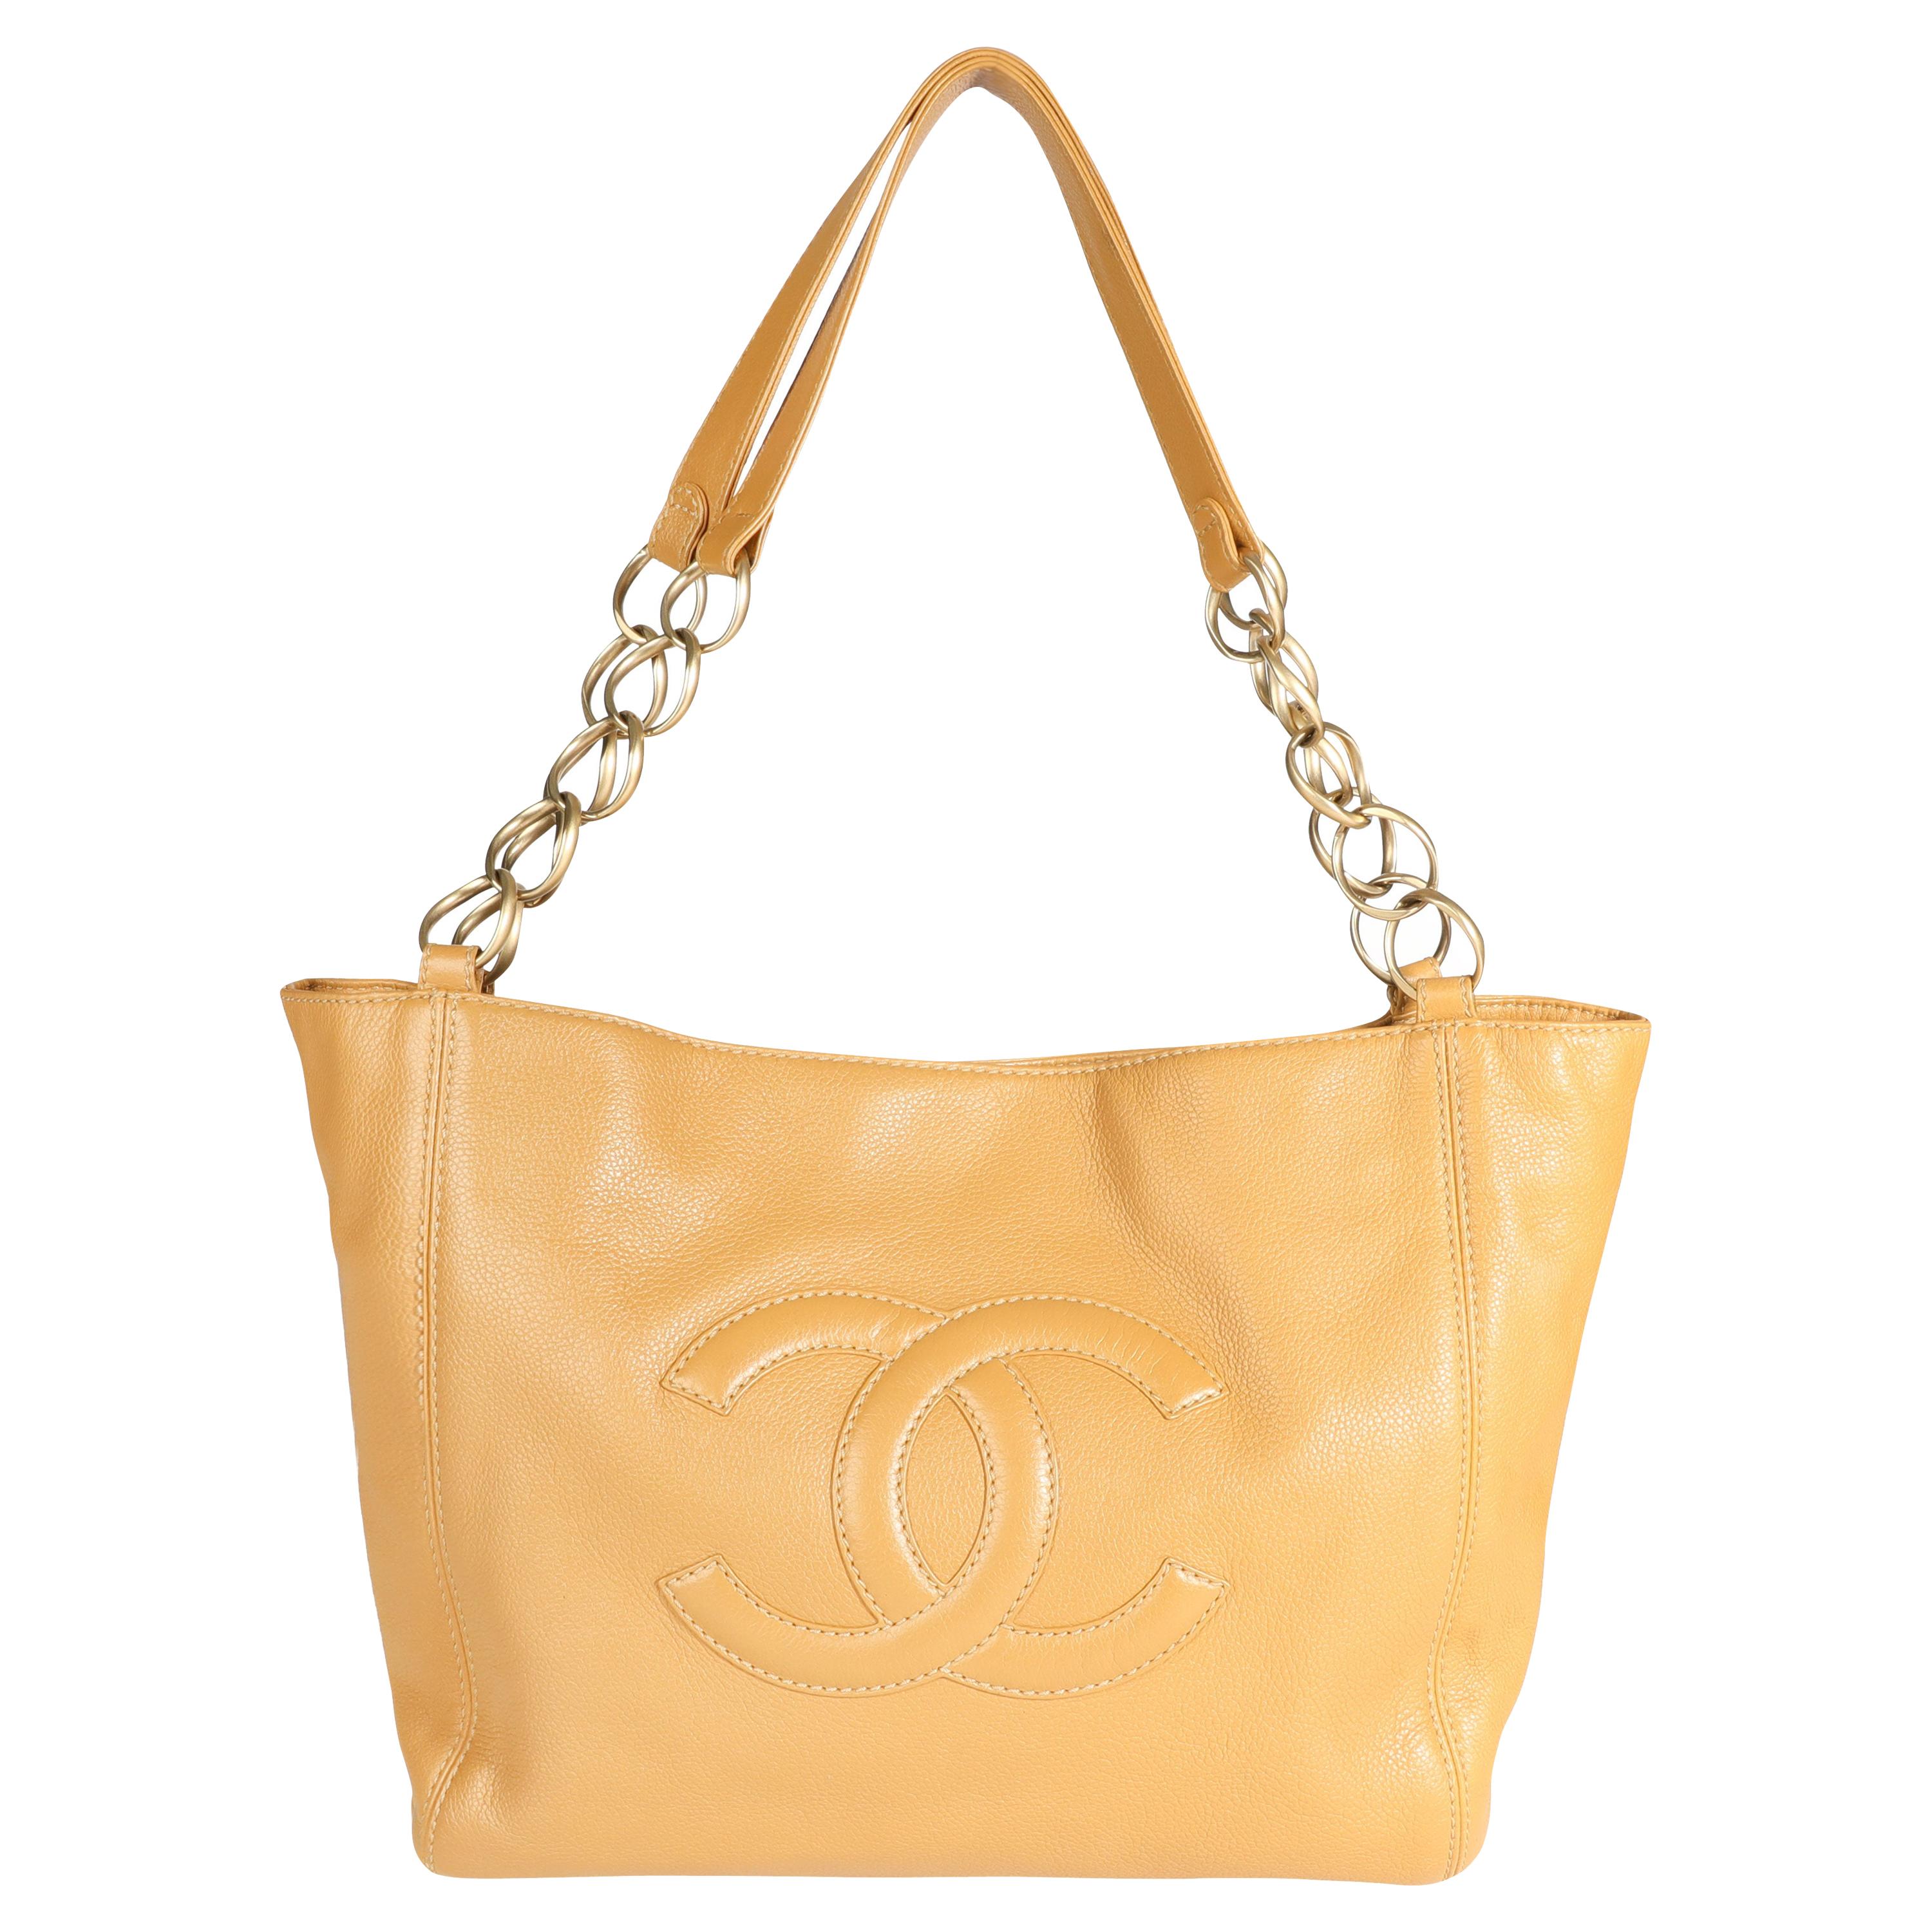 Chanel Camel Leather Timeless Shopping Bag